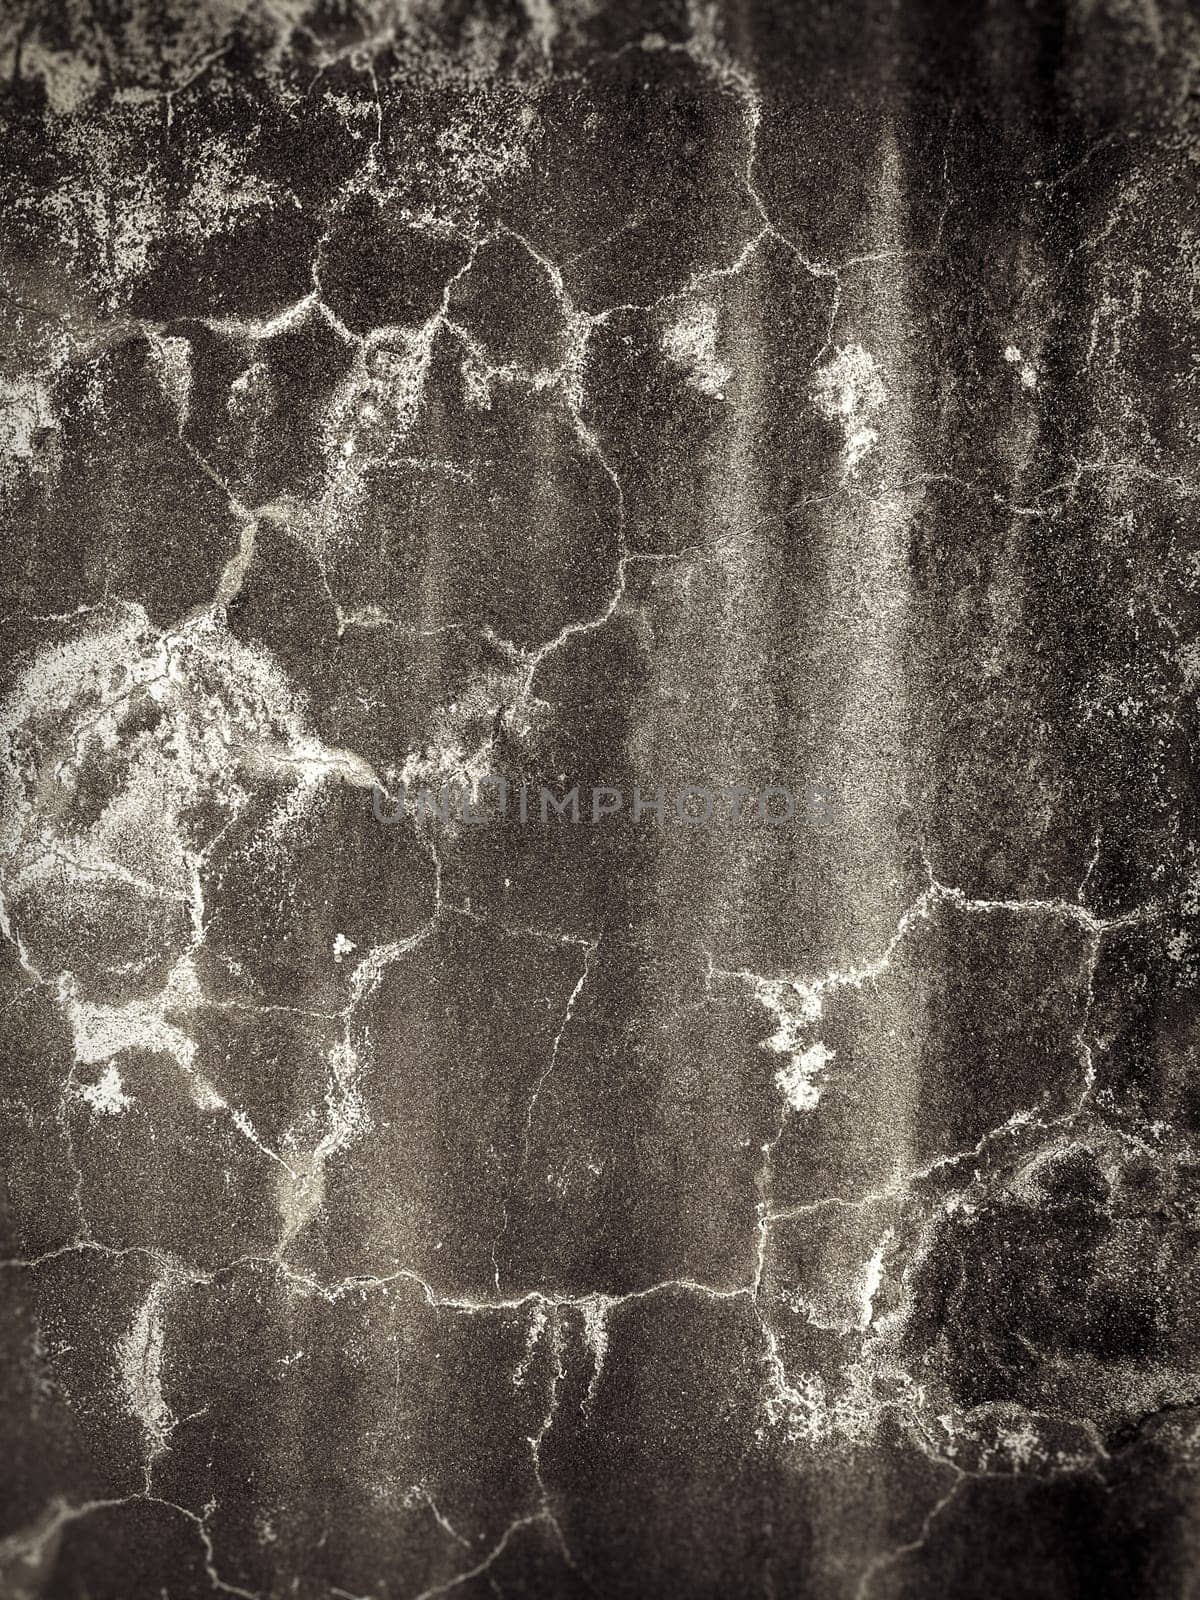 Grey cracked concrete wall texture. Abstract background of crack concrete wall.